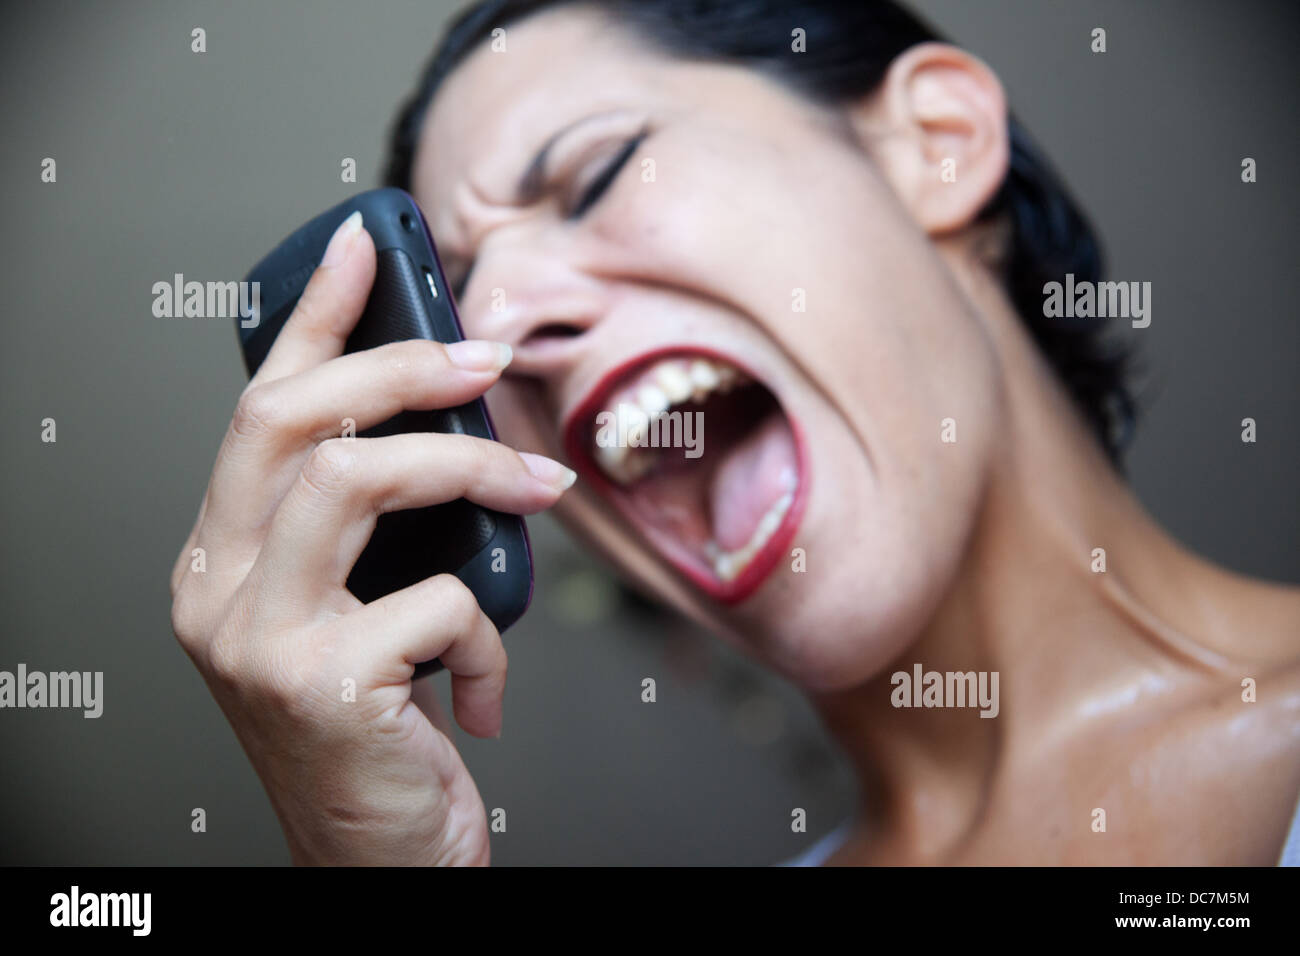 woman crying with phone Stock Photo